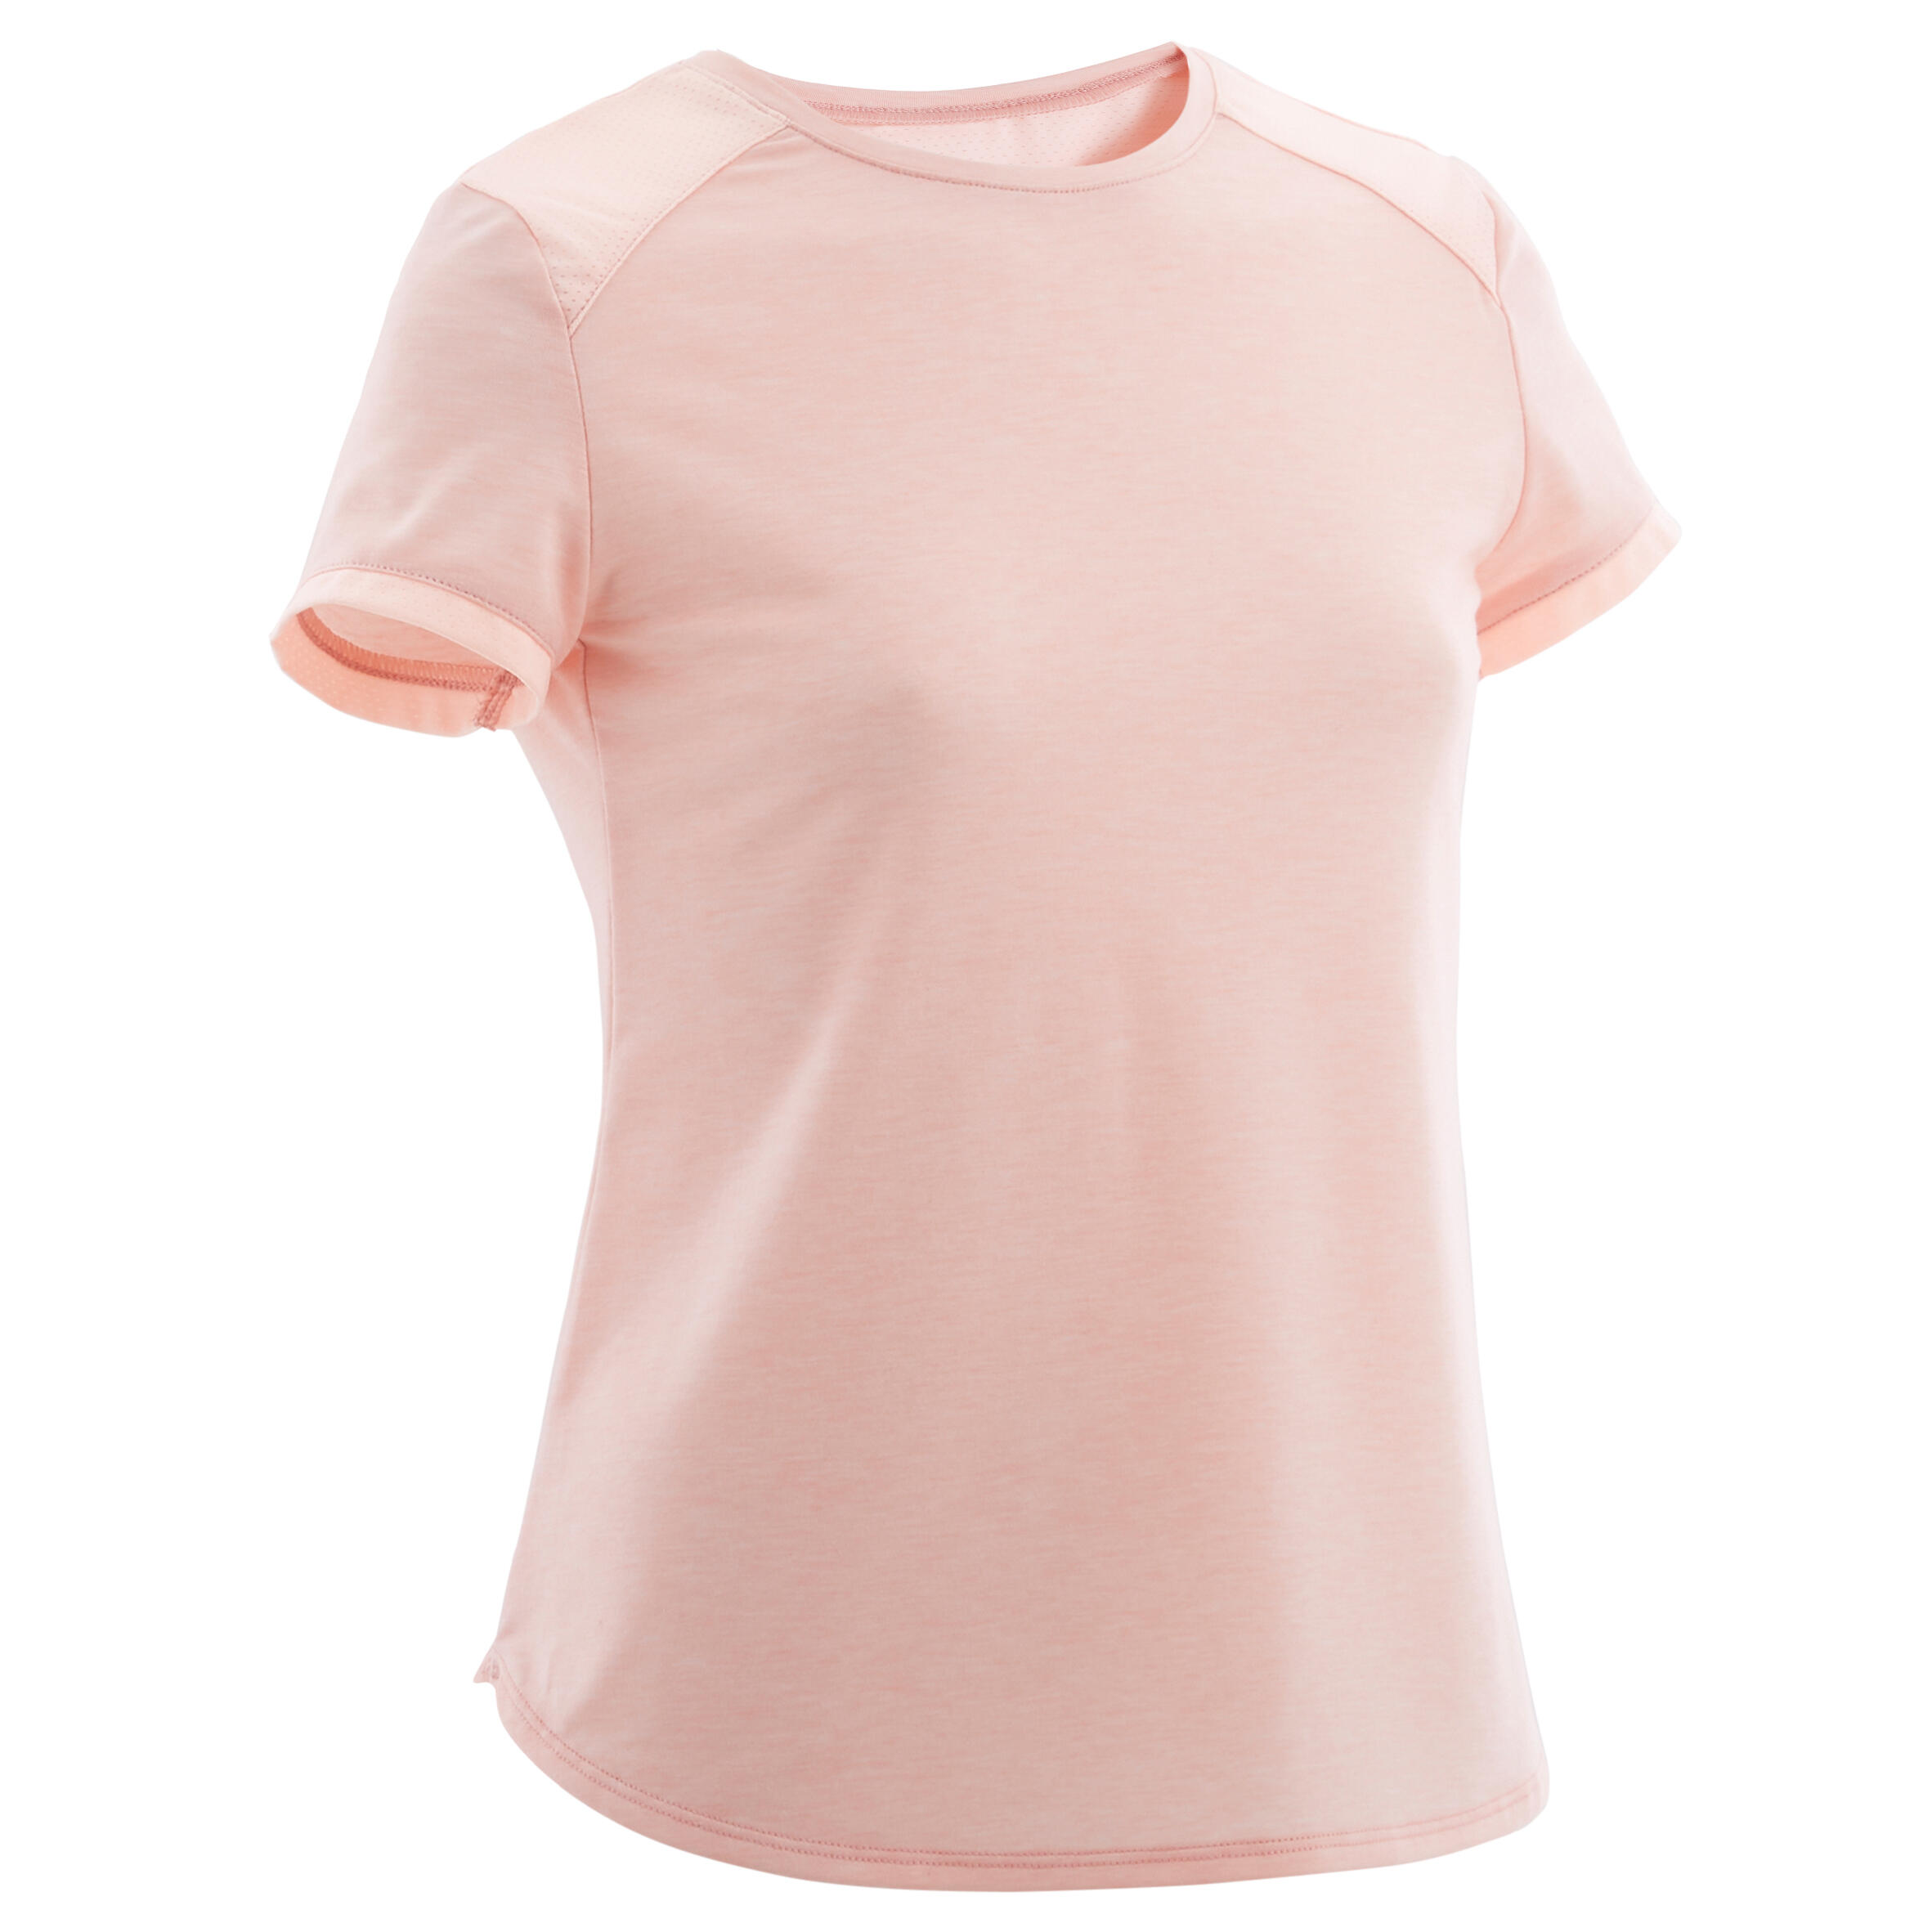 Cathalem Womens Tshirts Double Lined Slim Fit T Shirts,Pink XXL 